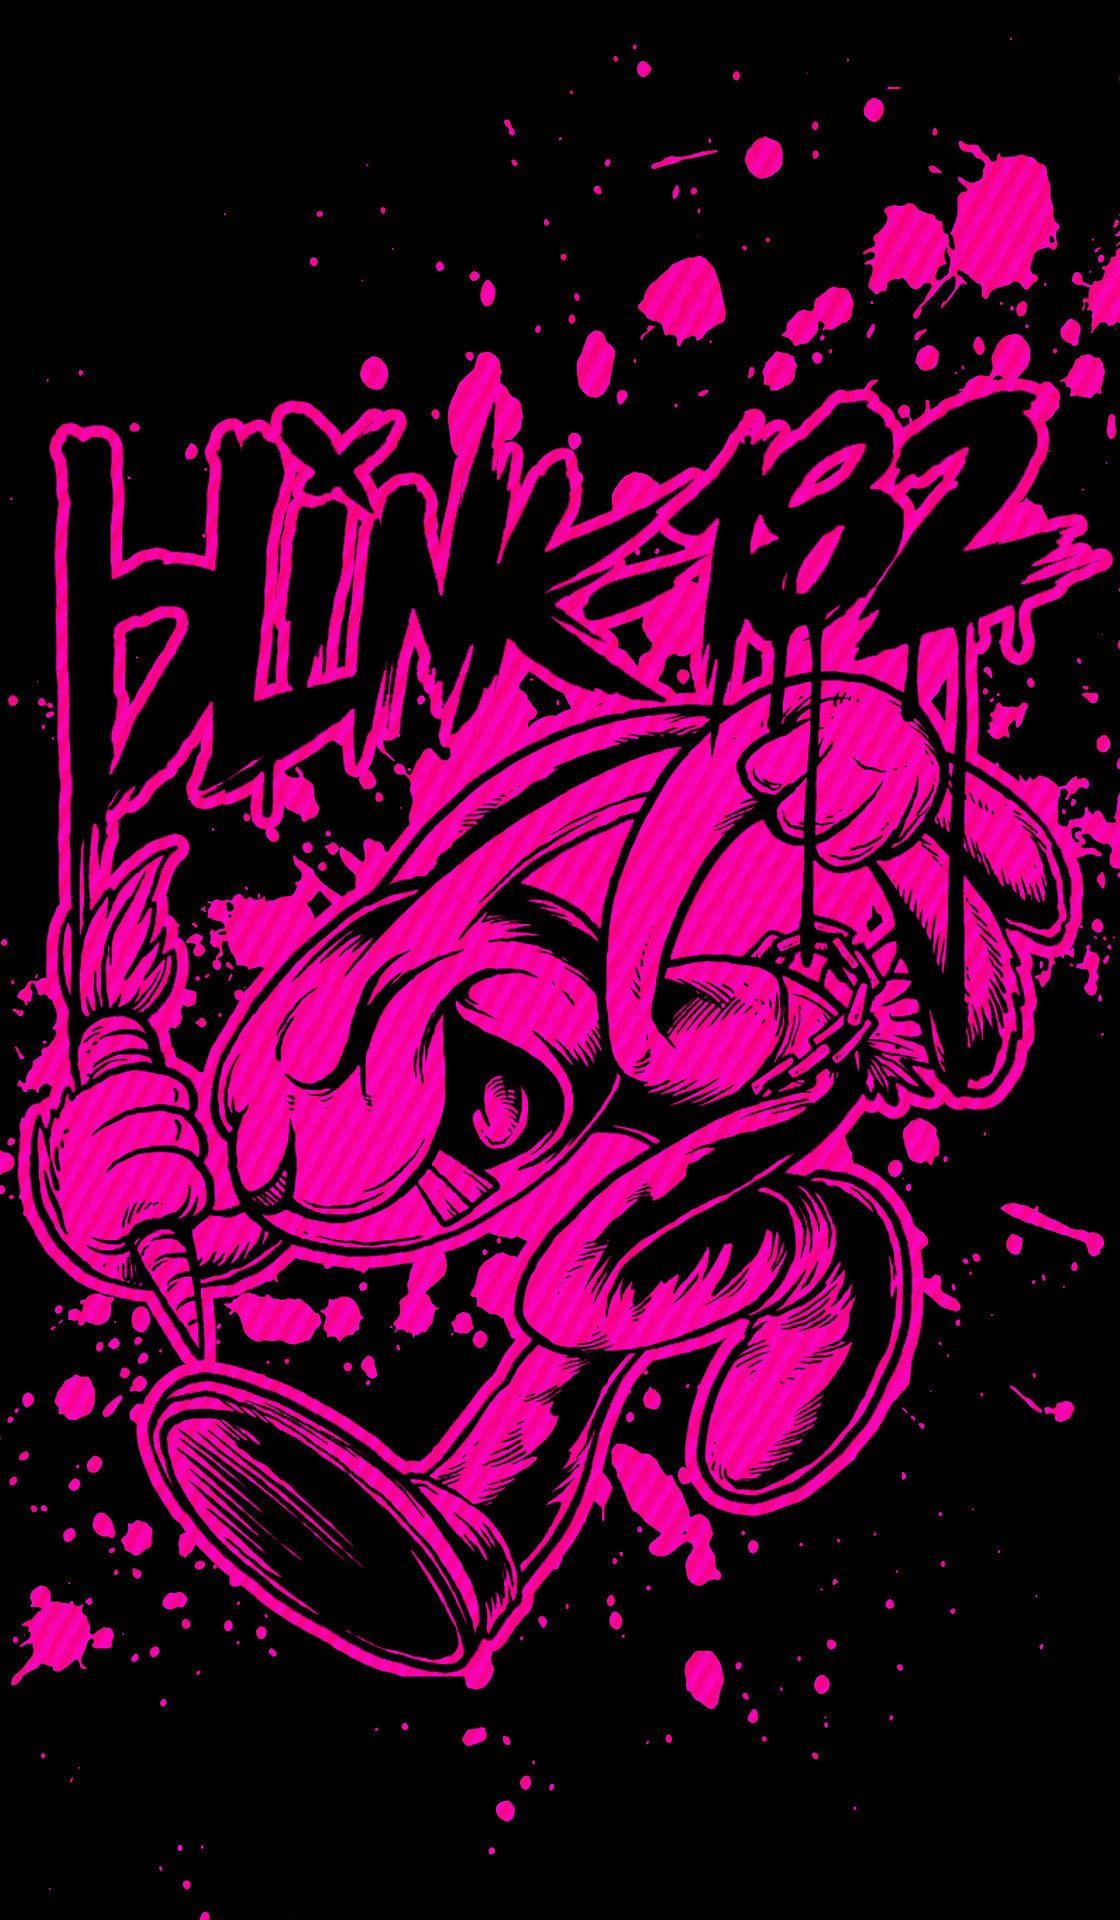 Another Punk Wallpaper by punkguydude on DeviantArt